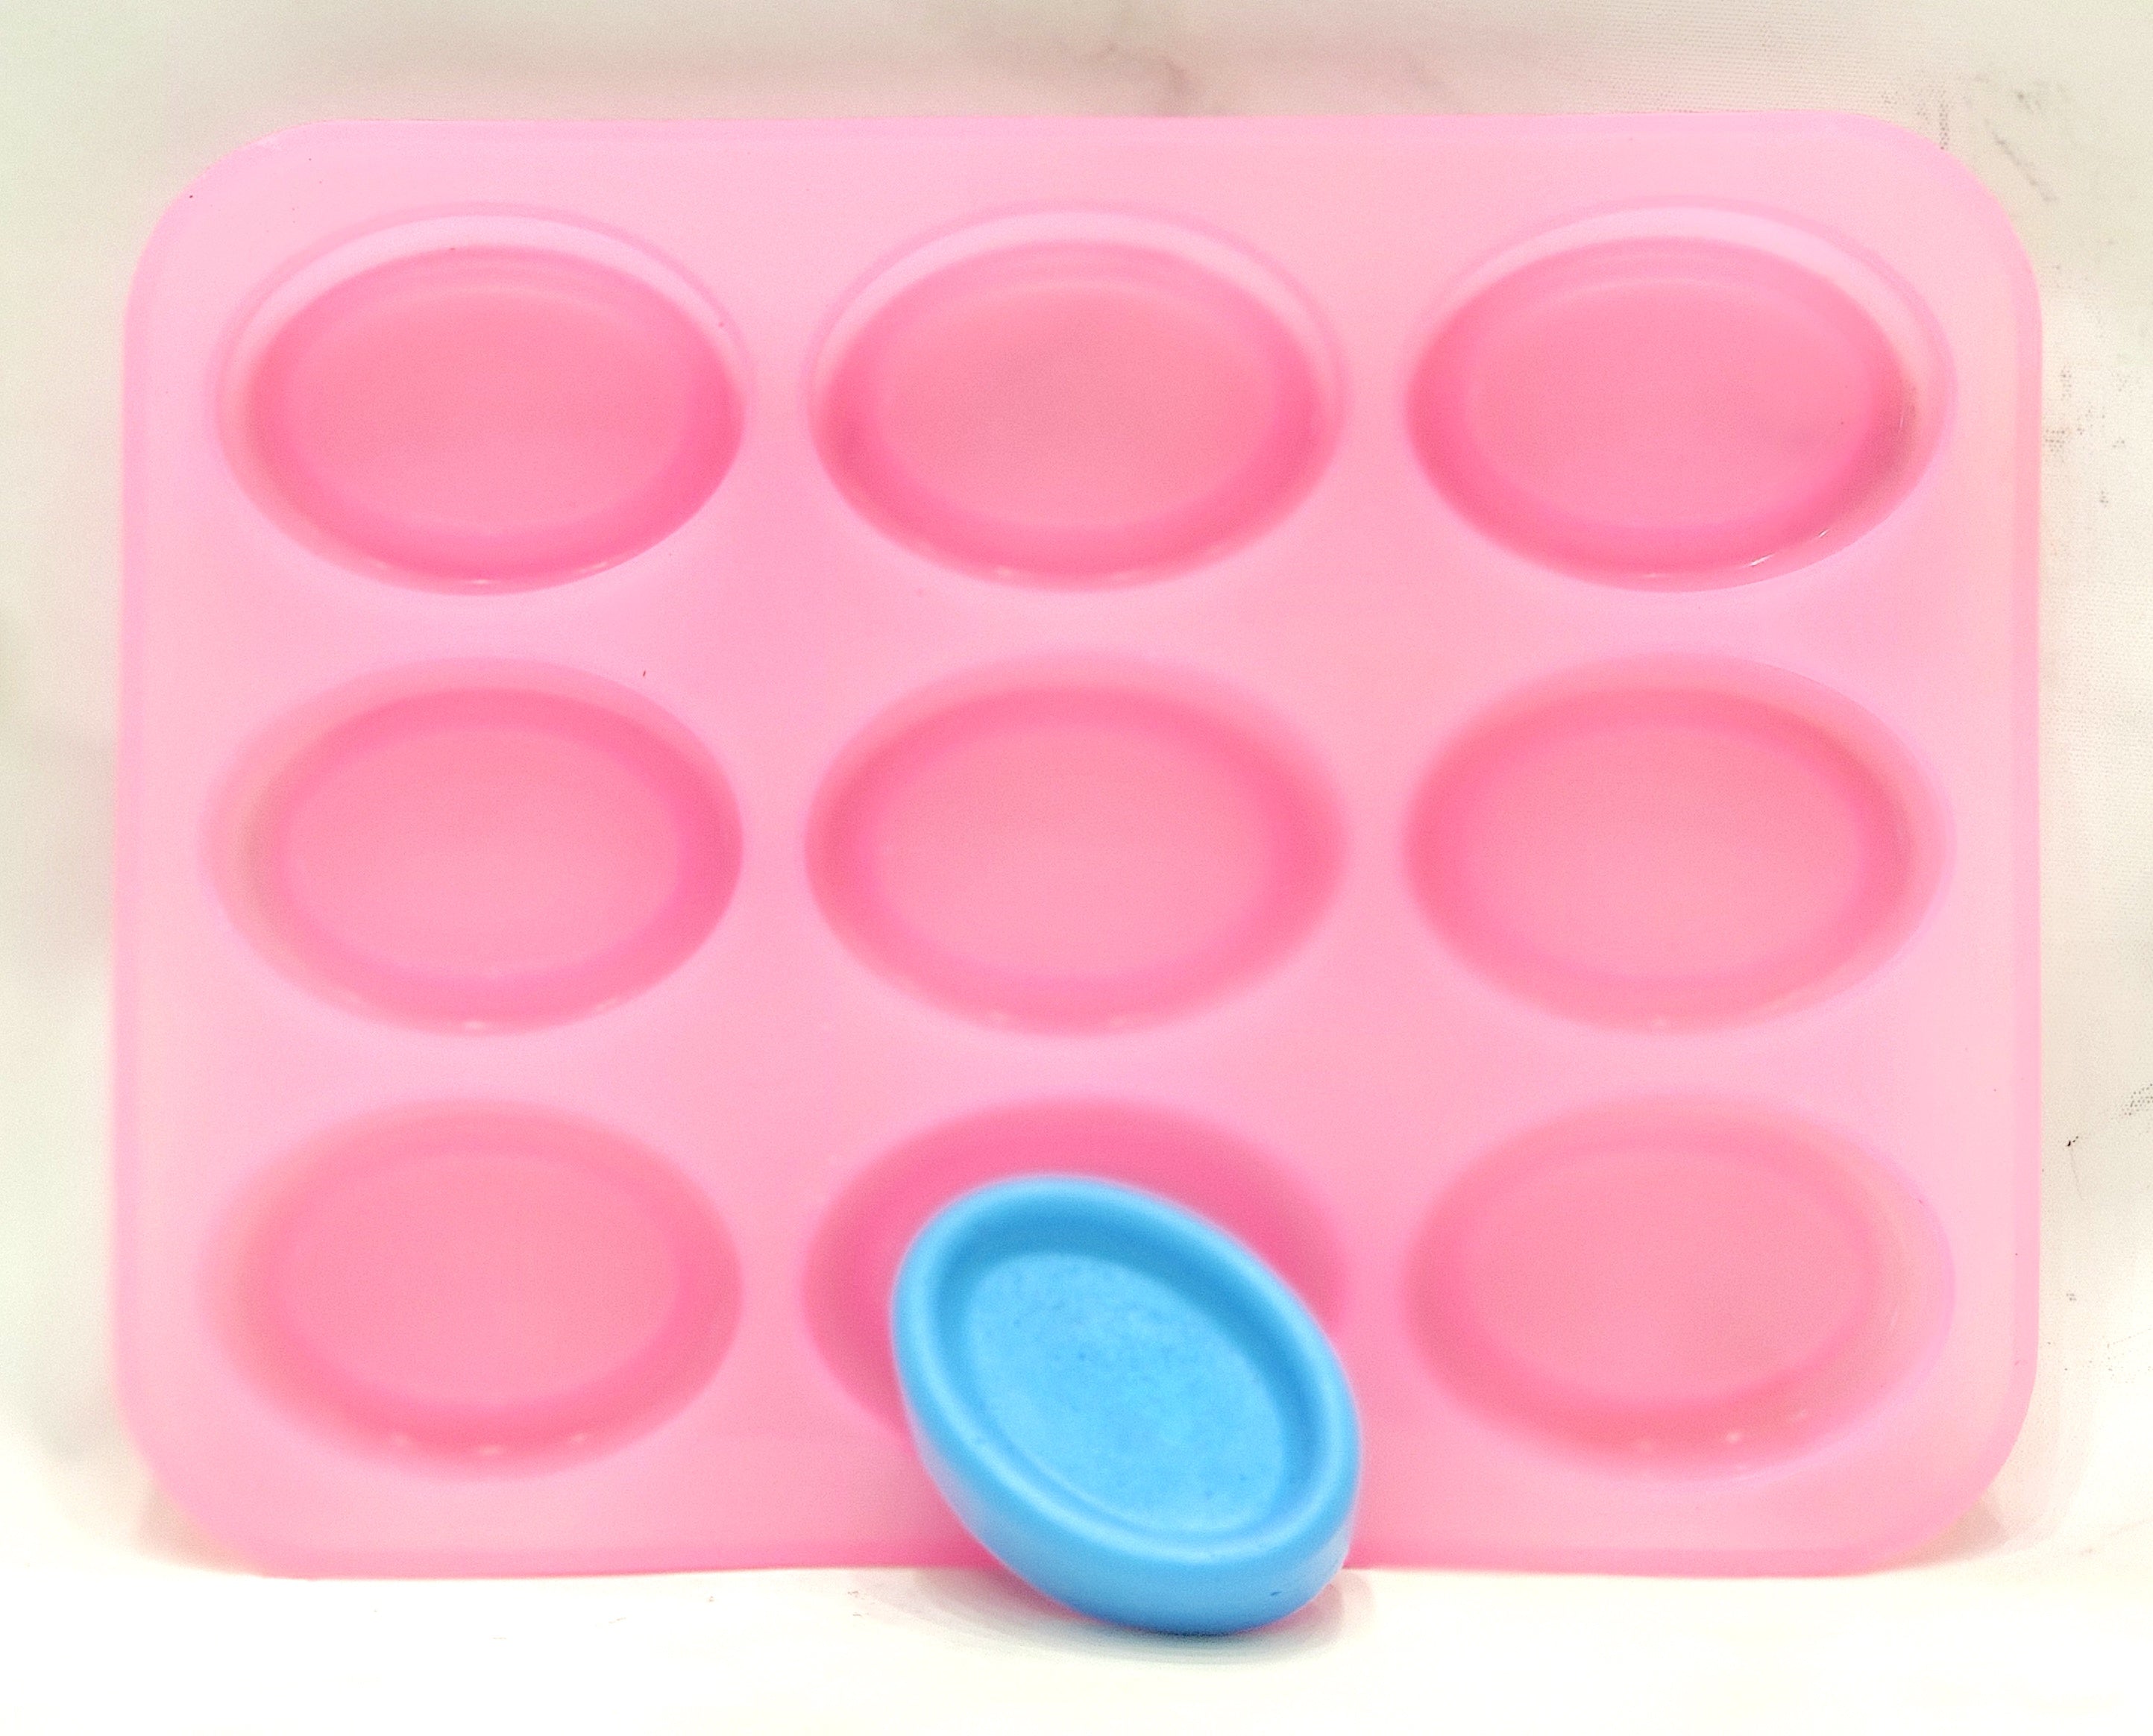 Oval Soap Mould (45gm)